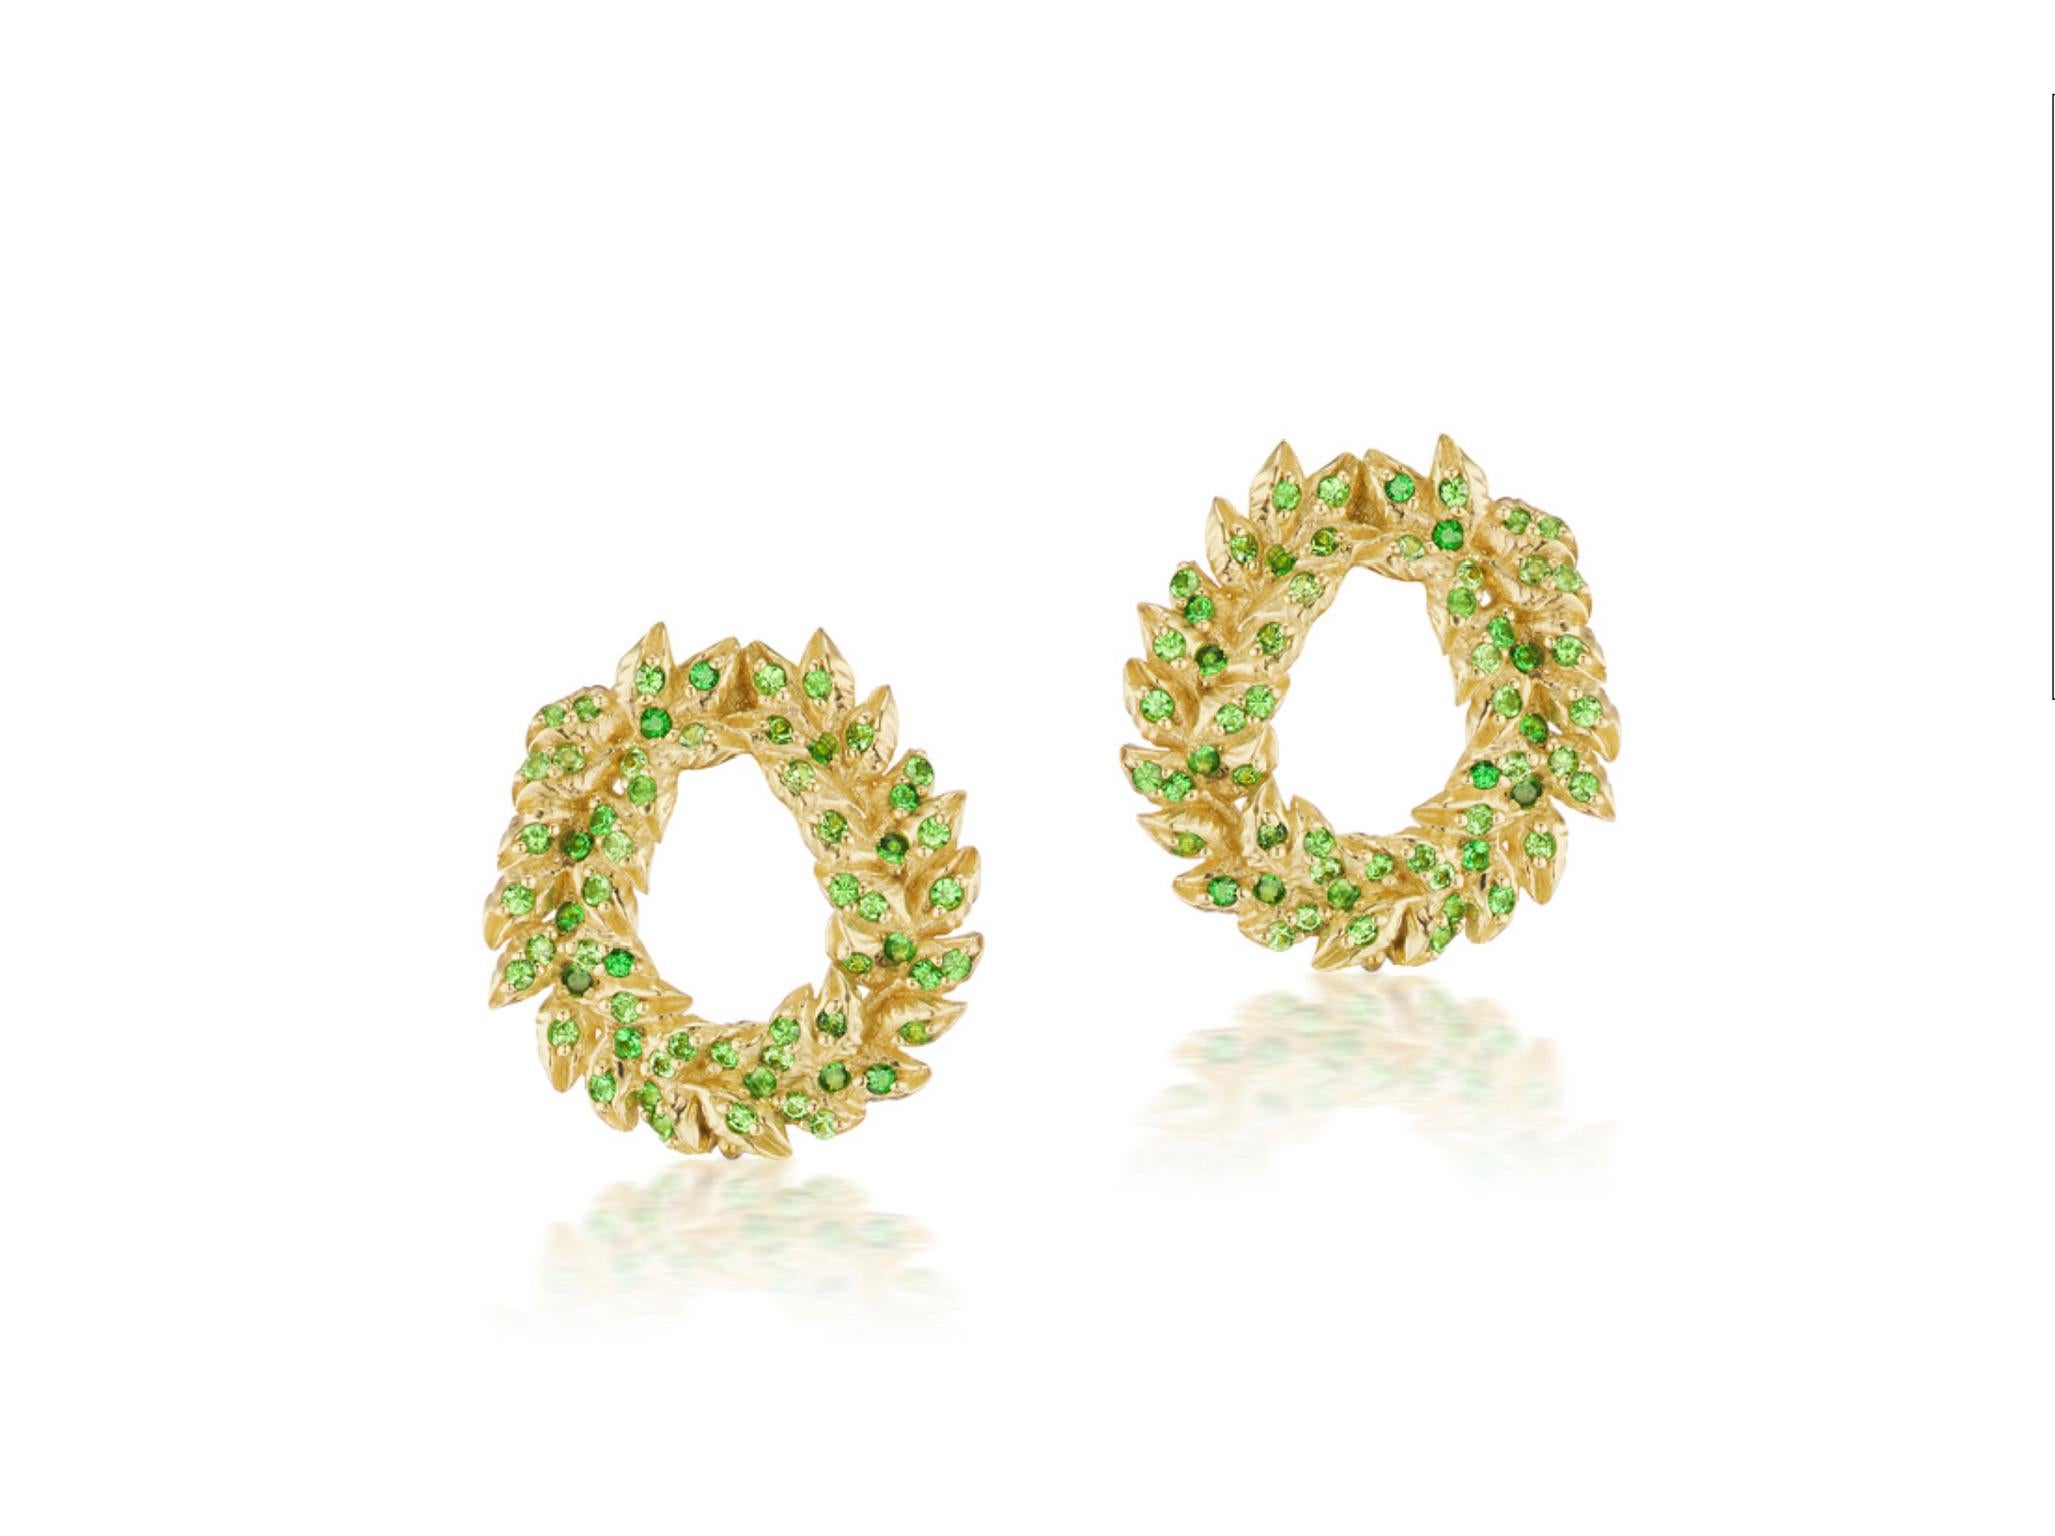 A beautiful pair of .75 ctw Tsavorite Corona earrings in 18K Yellow Gold made to be worn in different ways. They can be worn by themselves or with the tourmaline drops.  The 34.90 carats of faceted multi-colored Tourmalines create a spectacular